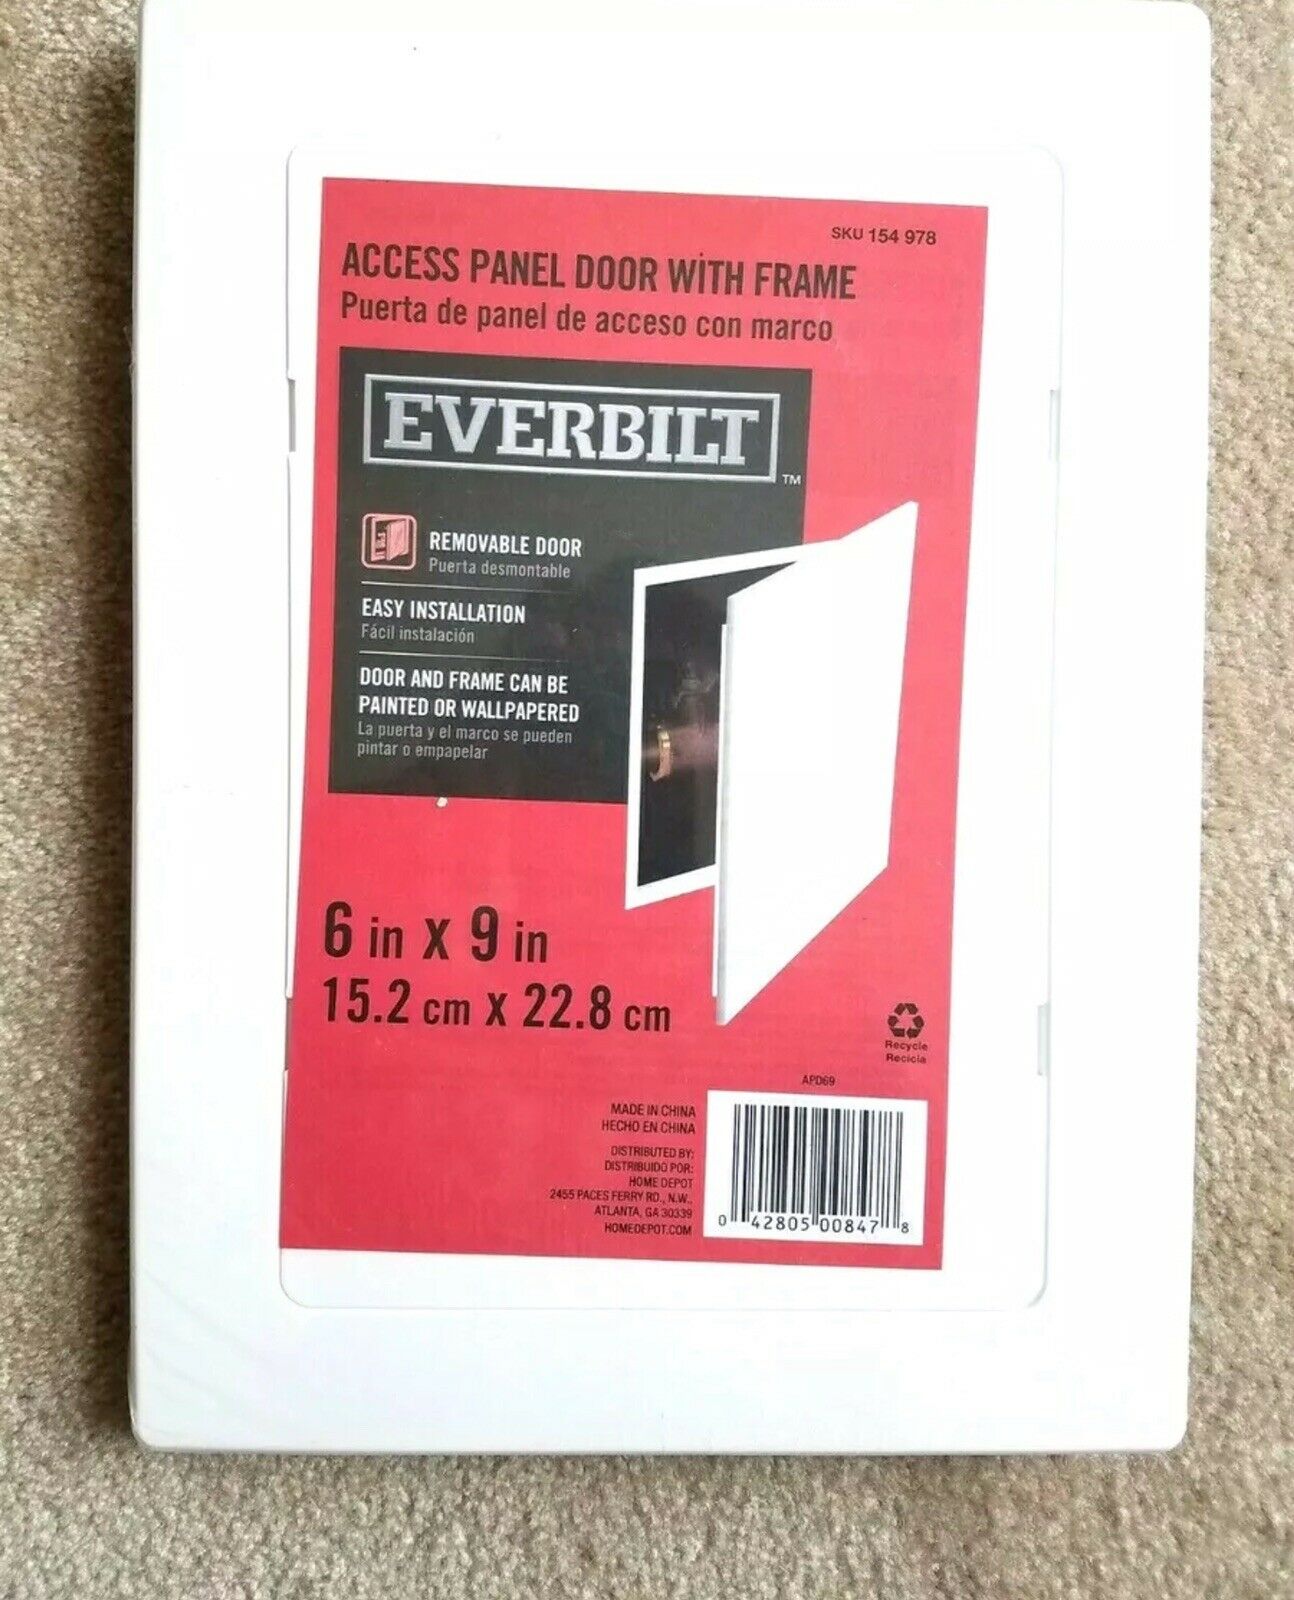 Everbilt Apd69 Access Panel Door With Frame 6" X 9" White 154978 Paintable New